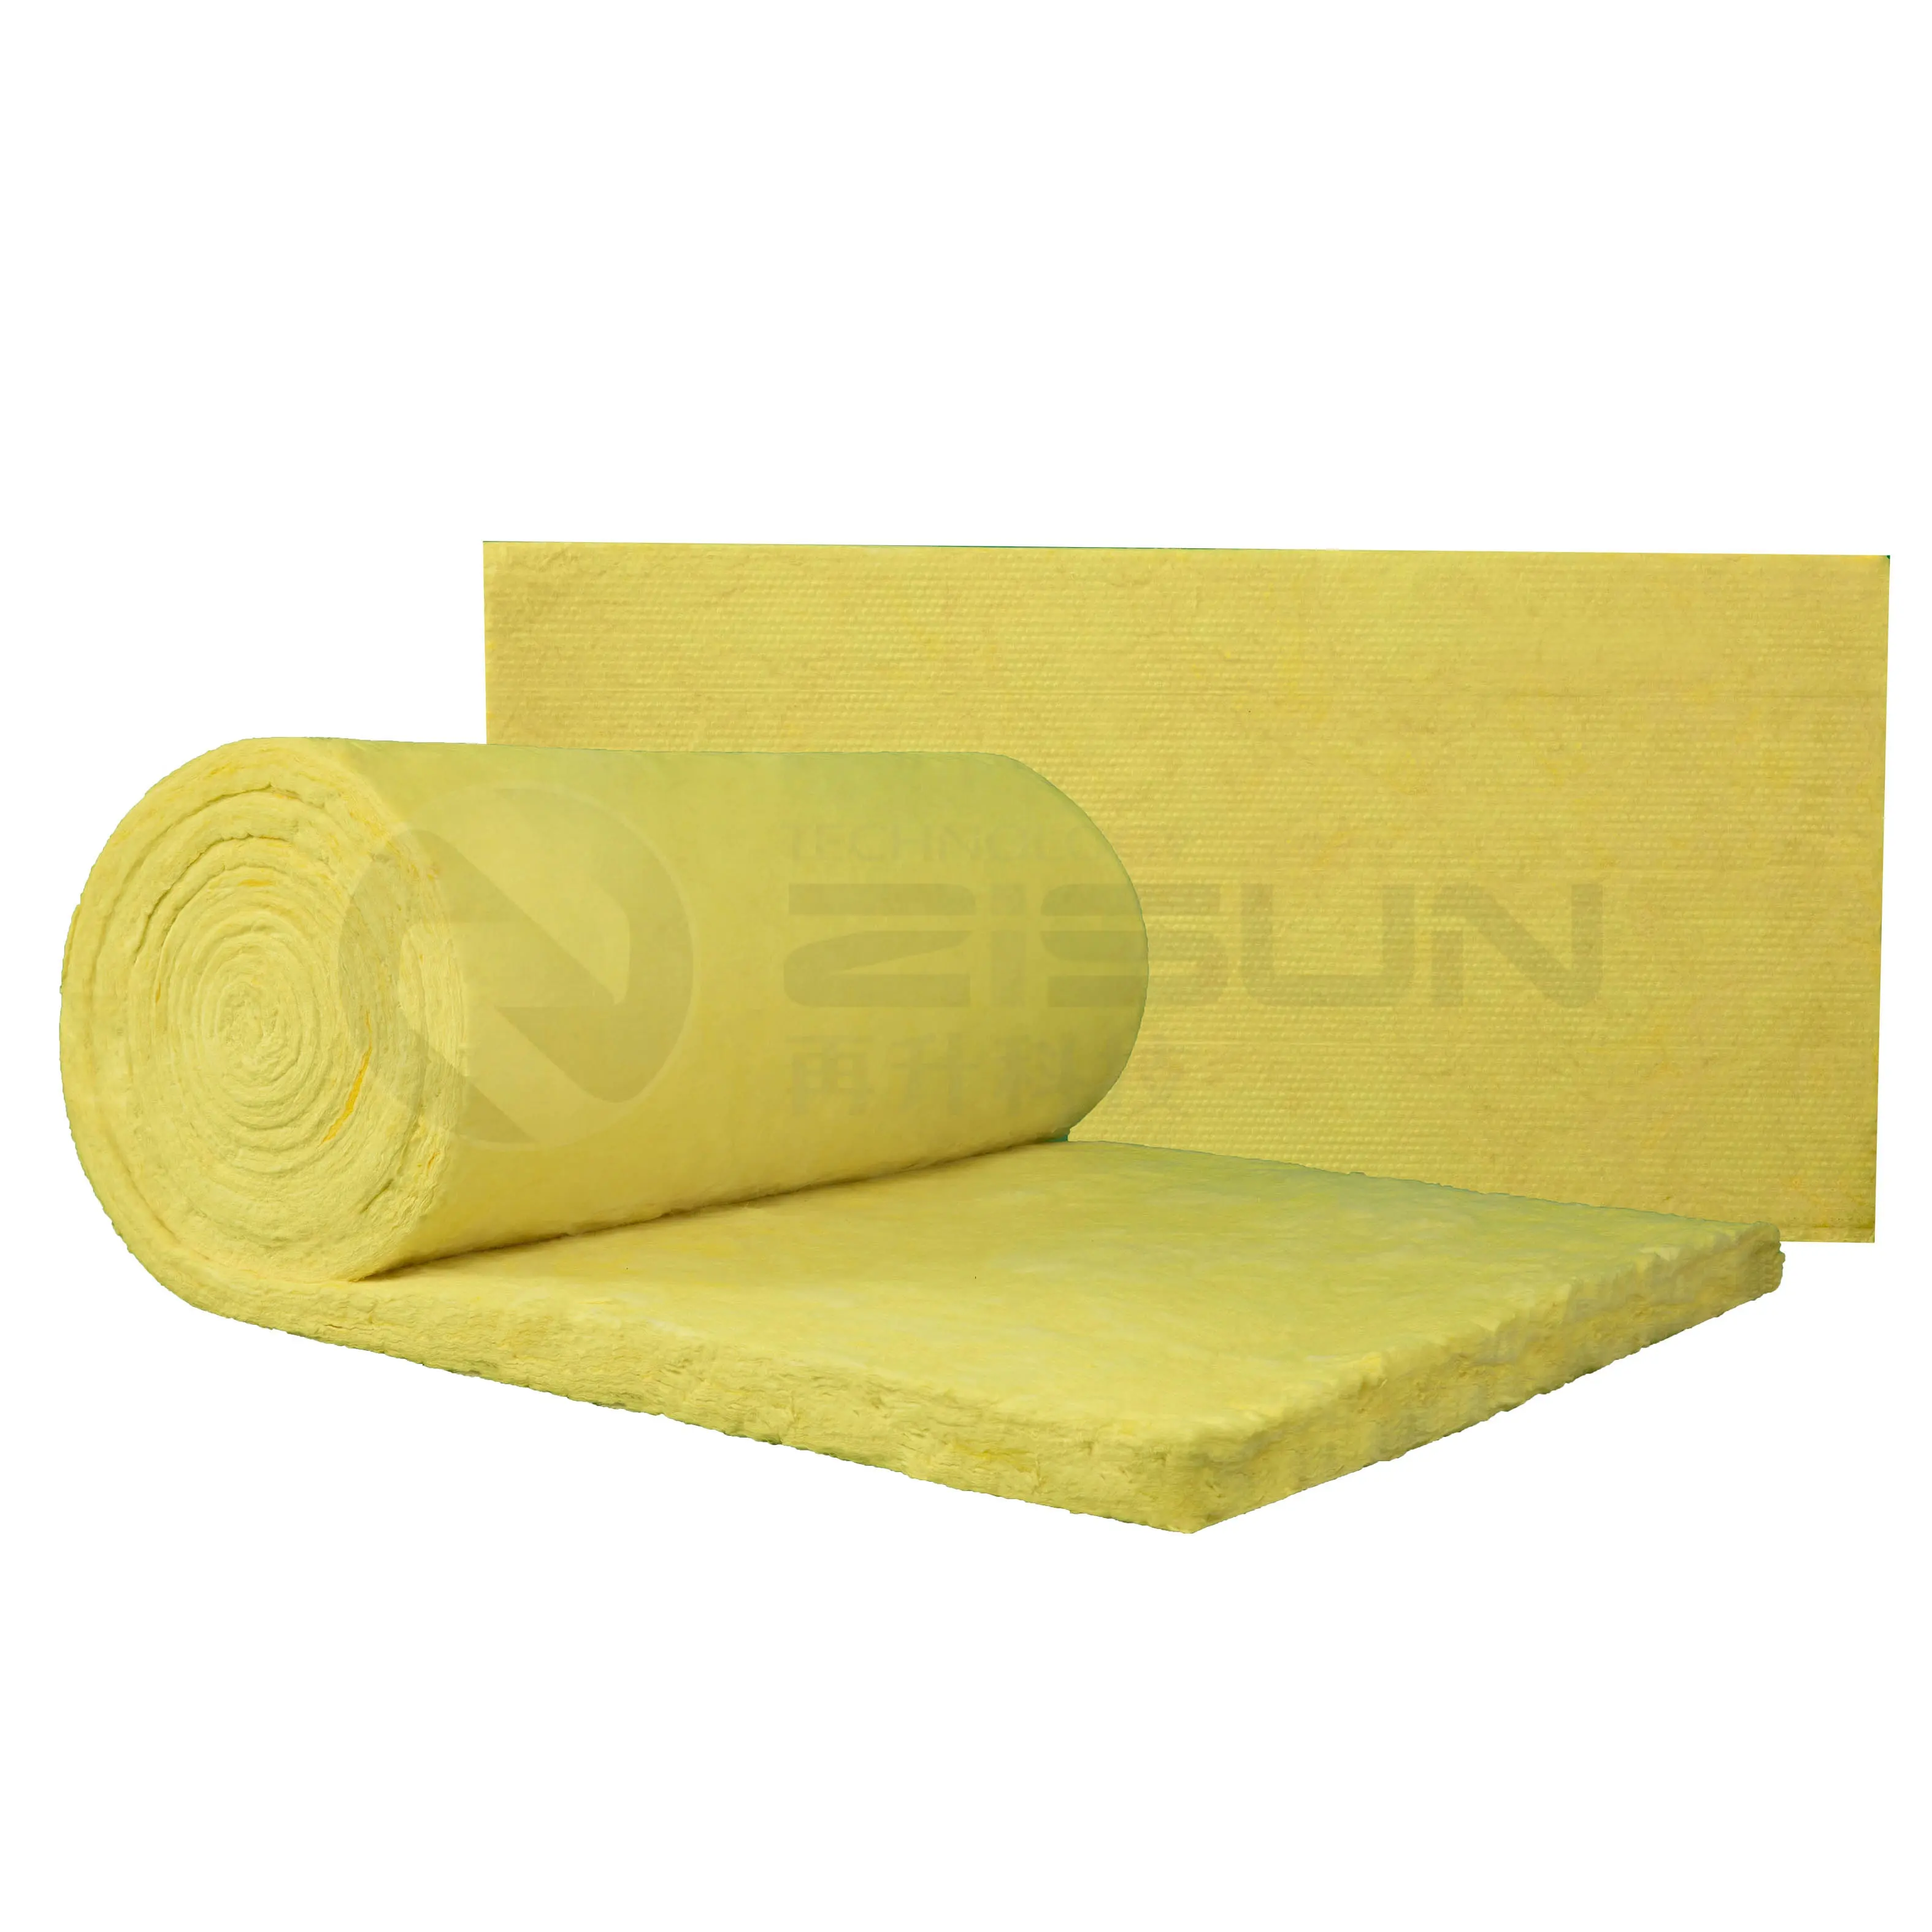 0.035W/mK Wall or roof thermal Insulation with aluminum foil veneer glass wool blanket or roll or fiberglass wool coil felt